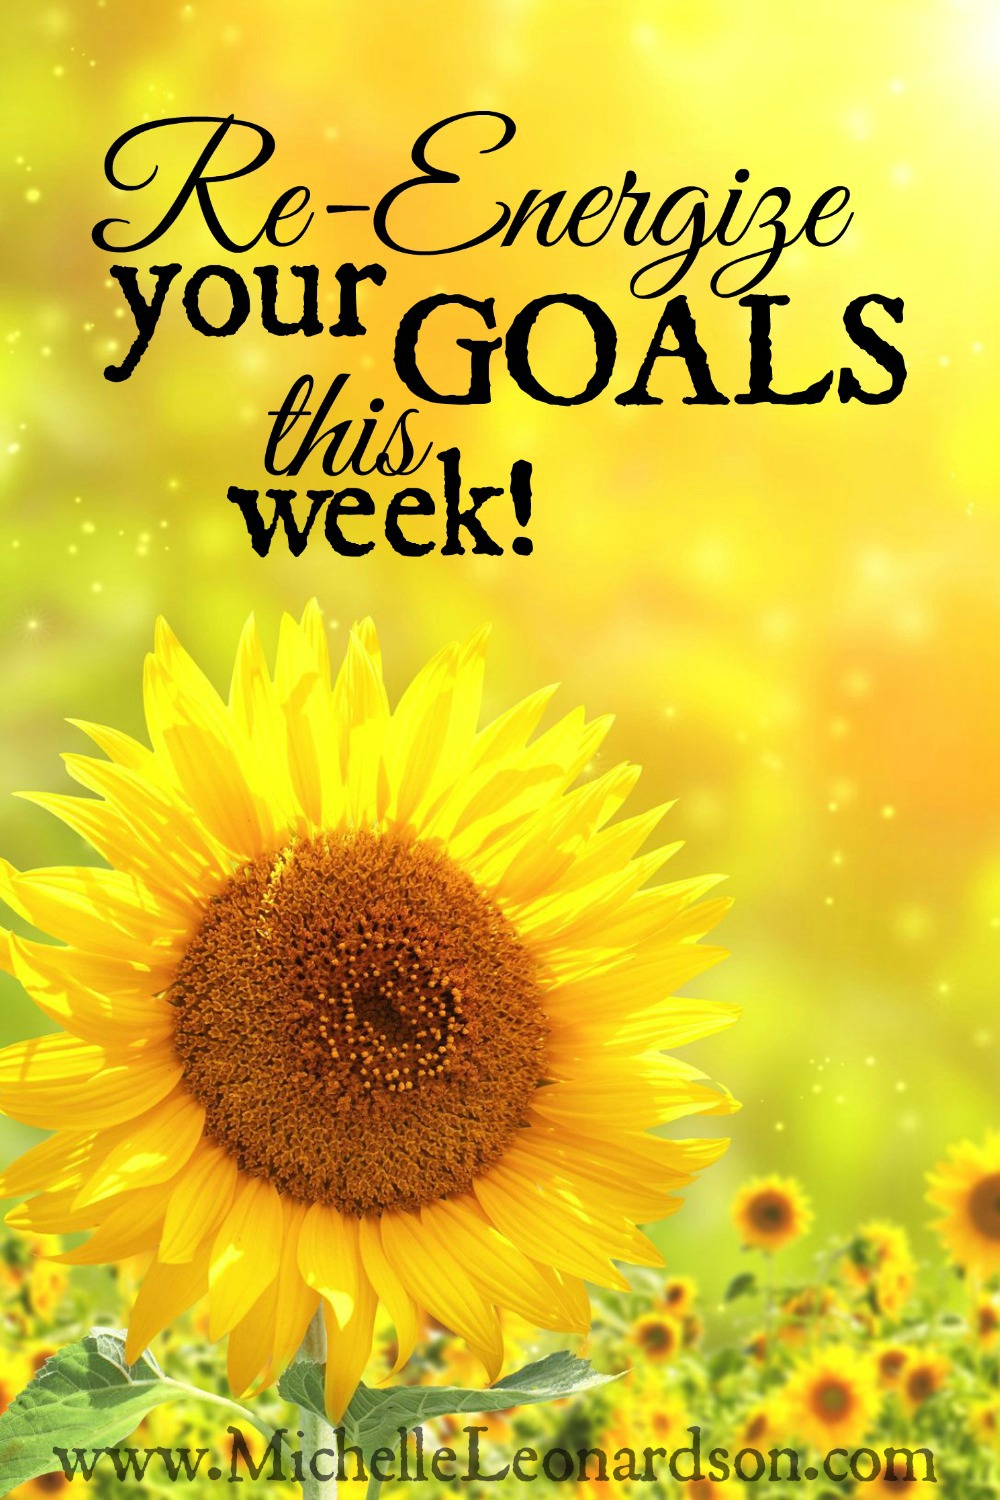 Are you crushing it or are you falling behind? Here are four awesome tips on how to re-energize your goals this week!